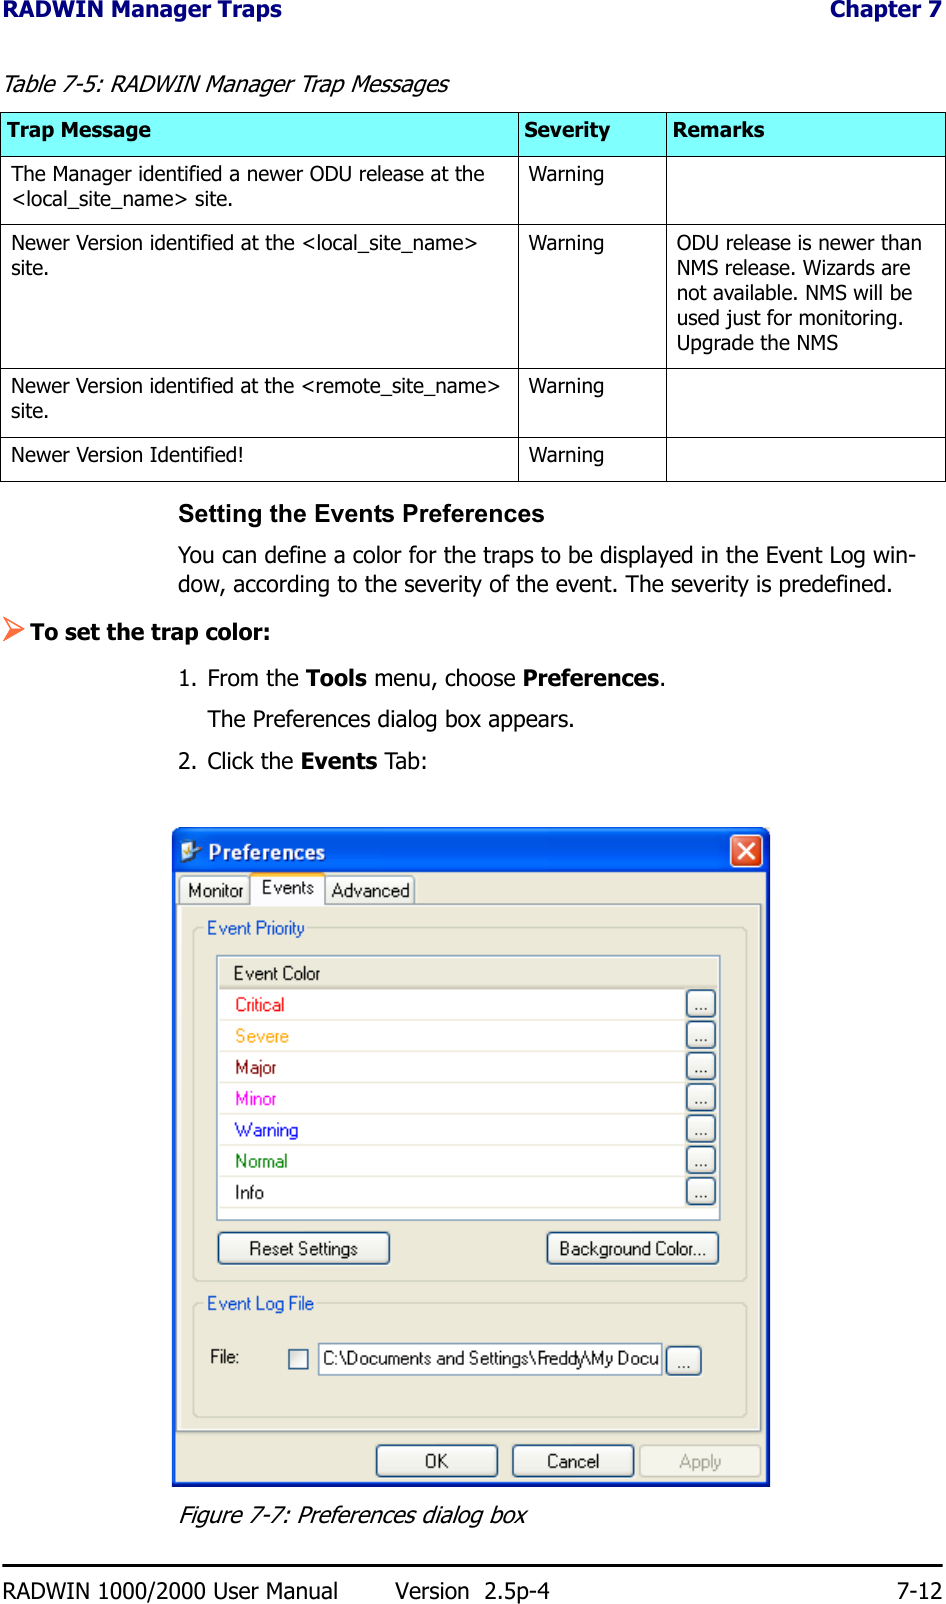 RADWIN Manager Traps  Chapter 7RADWIN 1000/2000 User Manual Version  2.5p-4 7-12Setting the Events PreferencesYou can define a color for the traps to be displayed in the Event Log win-dow, according to the severity of the event. The severity is predefined.¾To set the trap color:1. From the Tools menu, choose Preferences.The Preferences dialog box appears.2. Click the Events Tab:Figure 7-7: Preferences dialog boxThe Manager identified a newer ODU release at the &lt;local_site_name&gt; site. WarningNewer Version identified at the &lt;local_site_name&gt; site. Warning ODU release is newer than NMS release. Wizards are not available. NMS will be used just for monitoring. Upgrade the NMSNewer Version identified at the &lt;remote_site_name&gt; site. WarningNewer Version Identified! WarningTable 7-5: RADWIN Manager Trap MessagesTrap Message Severity Remarks